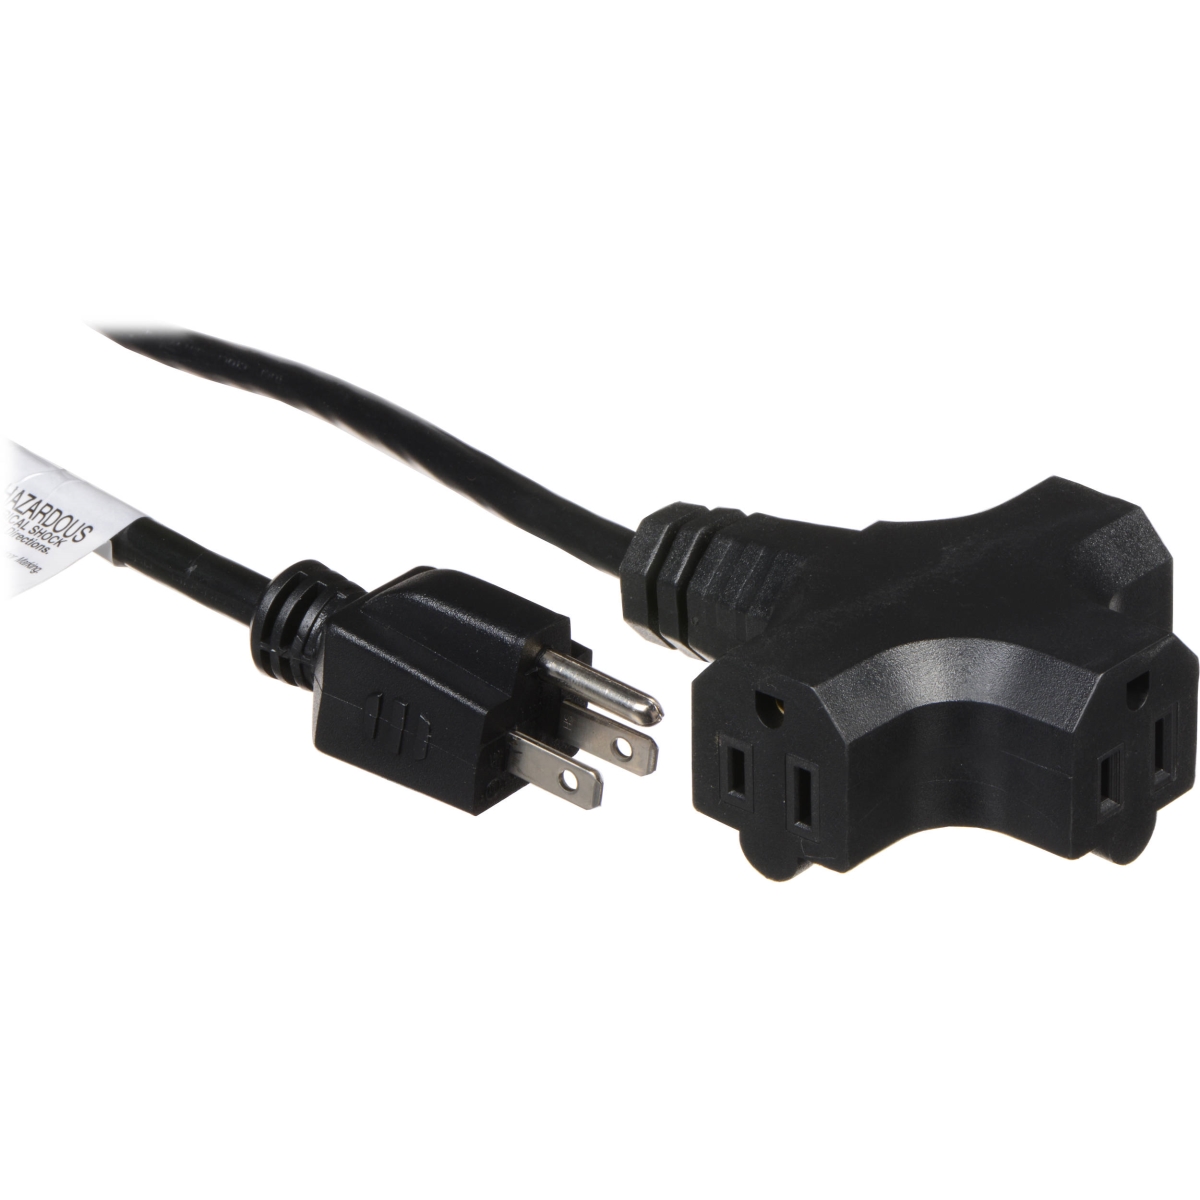 Picture of American DJ EC163-3FER25 25 ft. 16 AWG 3 Gauge Edison Extension Cord with Three Plugs, Black